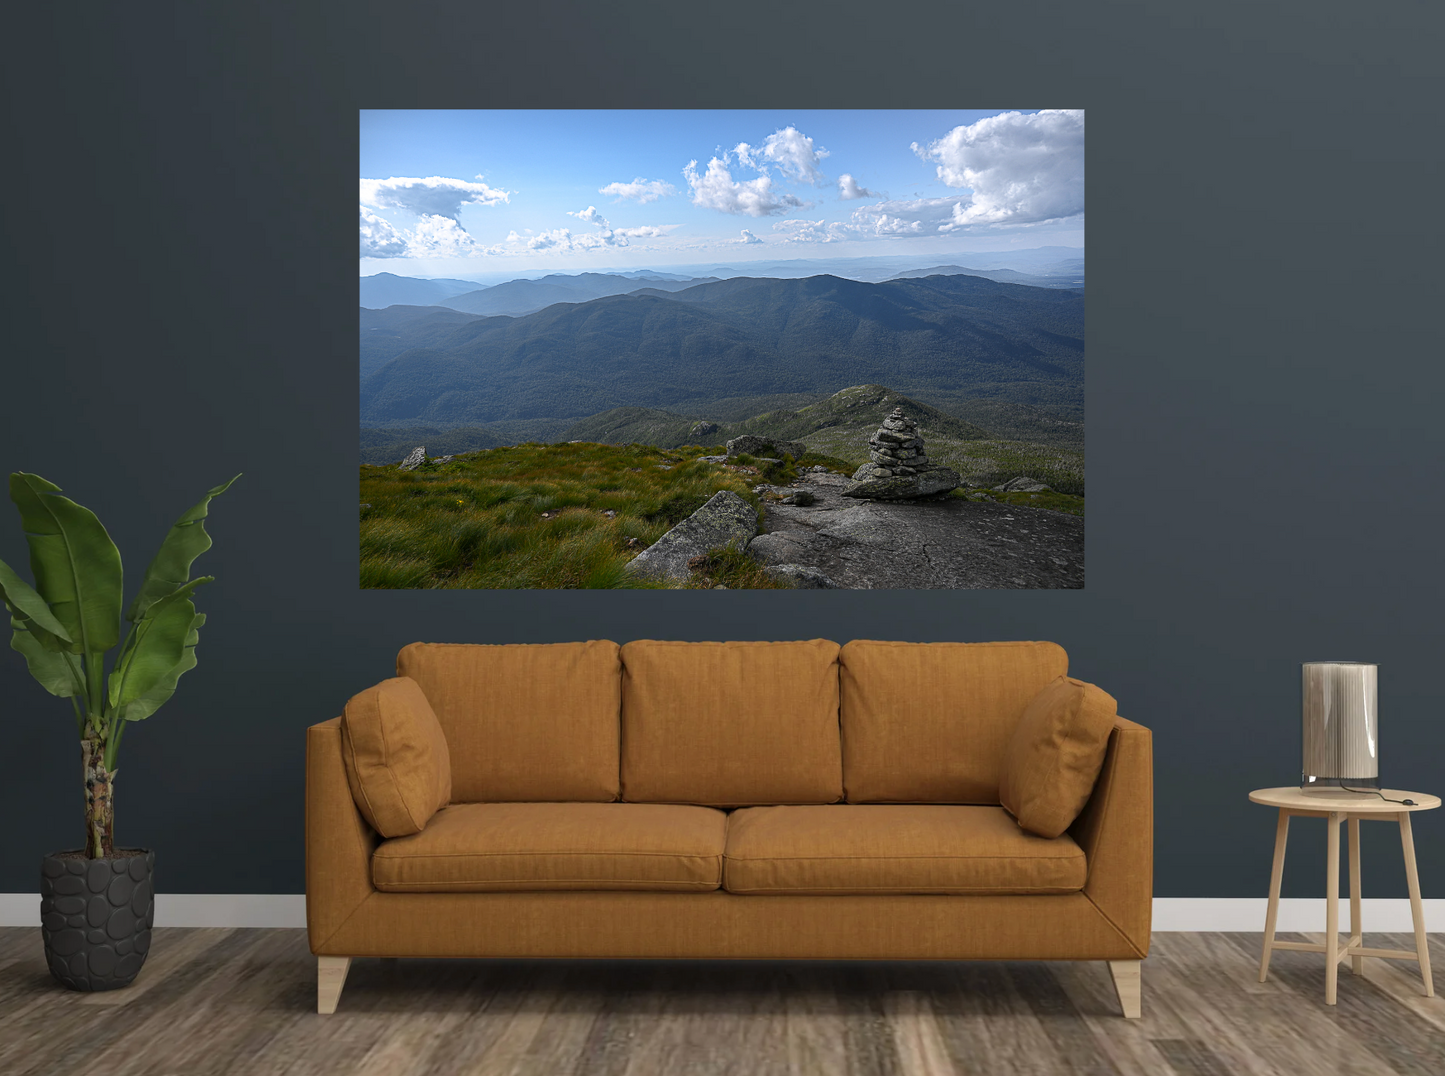 print of Summer Afternoon Views from Algonquin Mountain